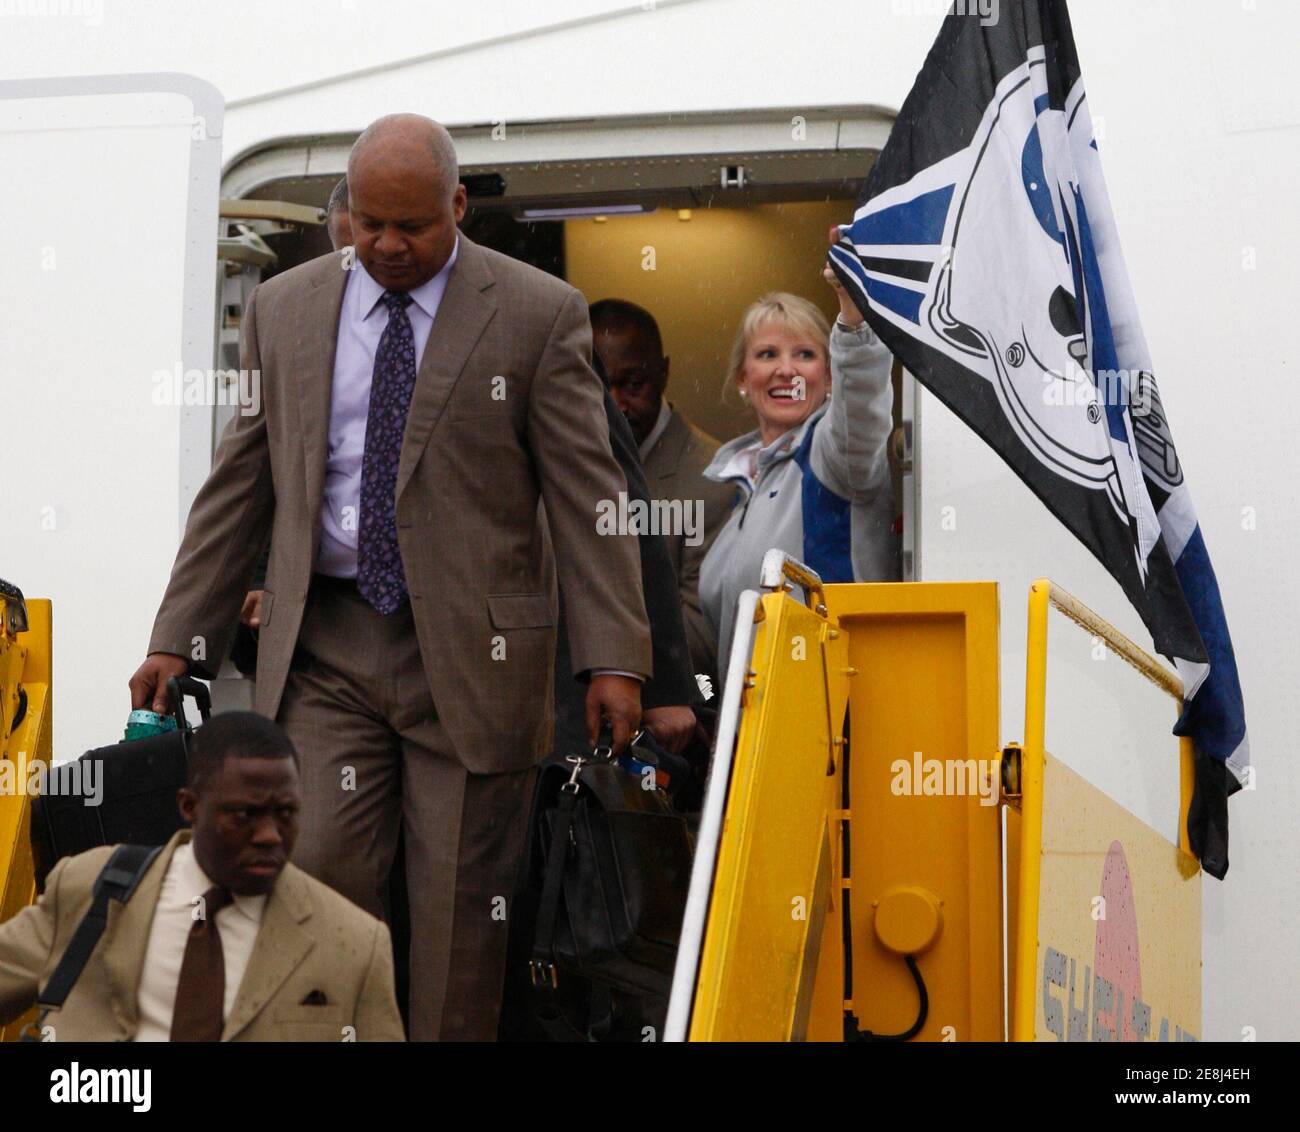 The NFL Indianapolis Colts head coach Jim Caldwell (C) and defensive backs coach  Alan Williams (bottom) disembark the team's charter as a flight attendant  waves a flag at Ft. Lauderdale airport in